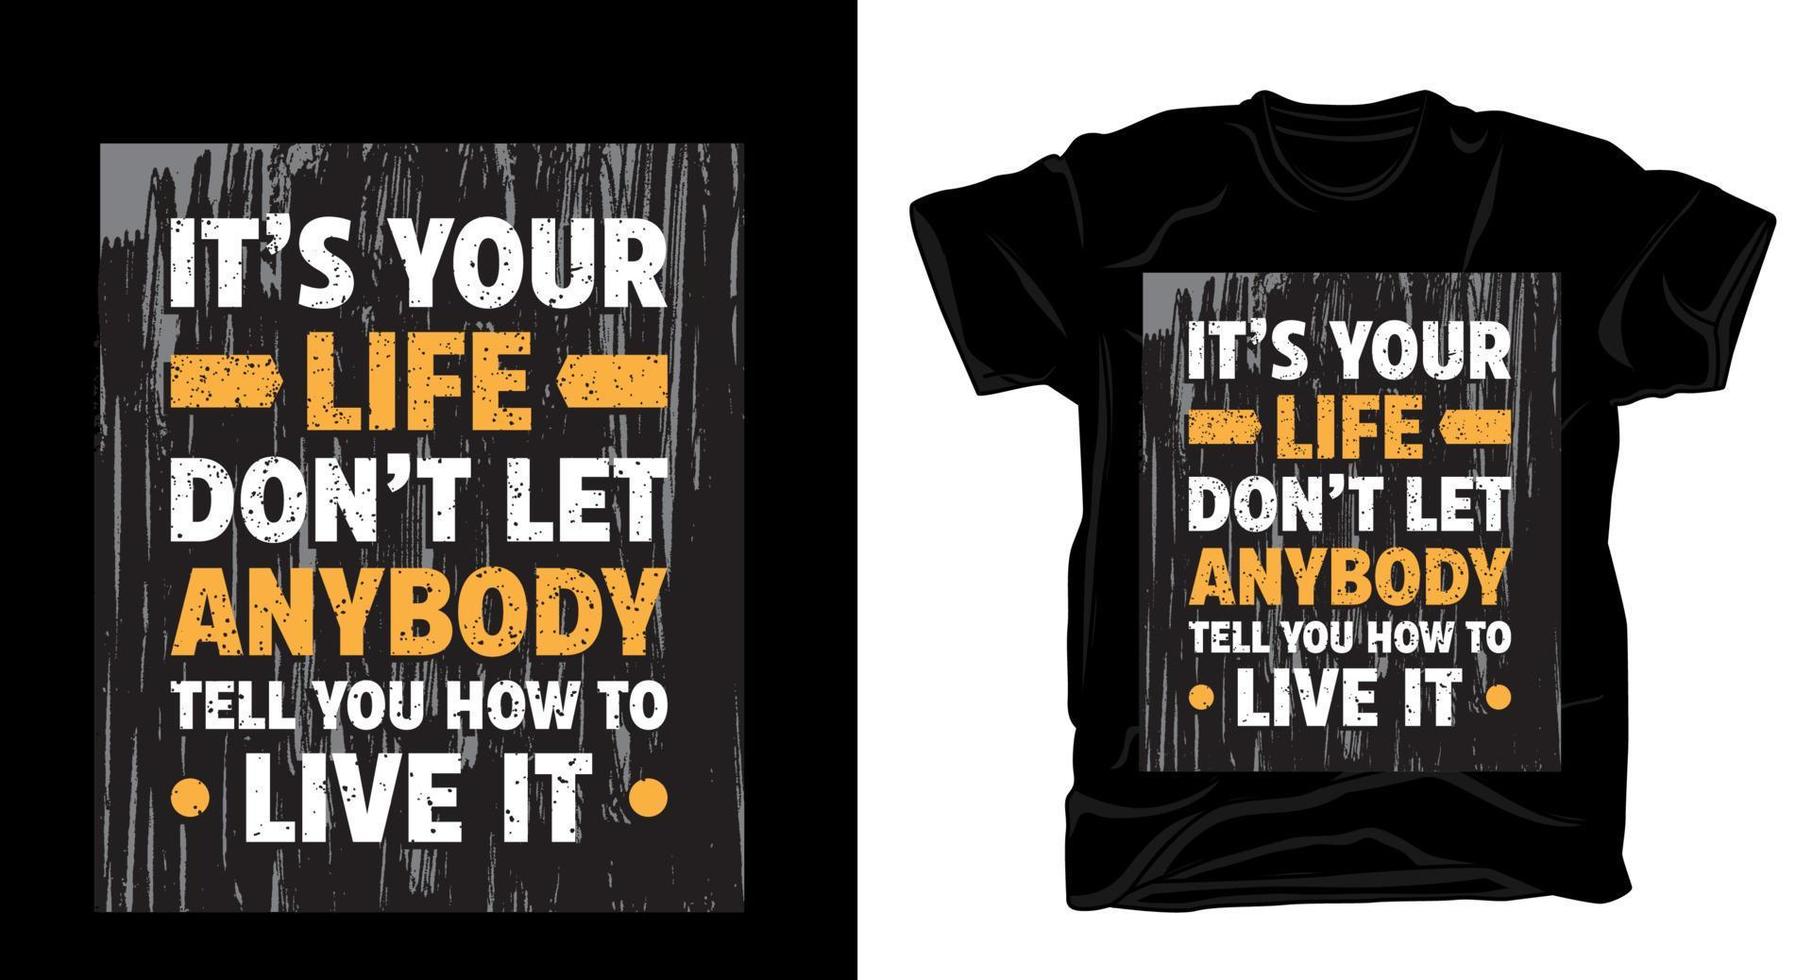 It's your life don't let anybody tell you how to live it t-shirt design vector